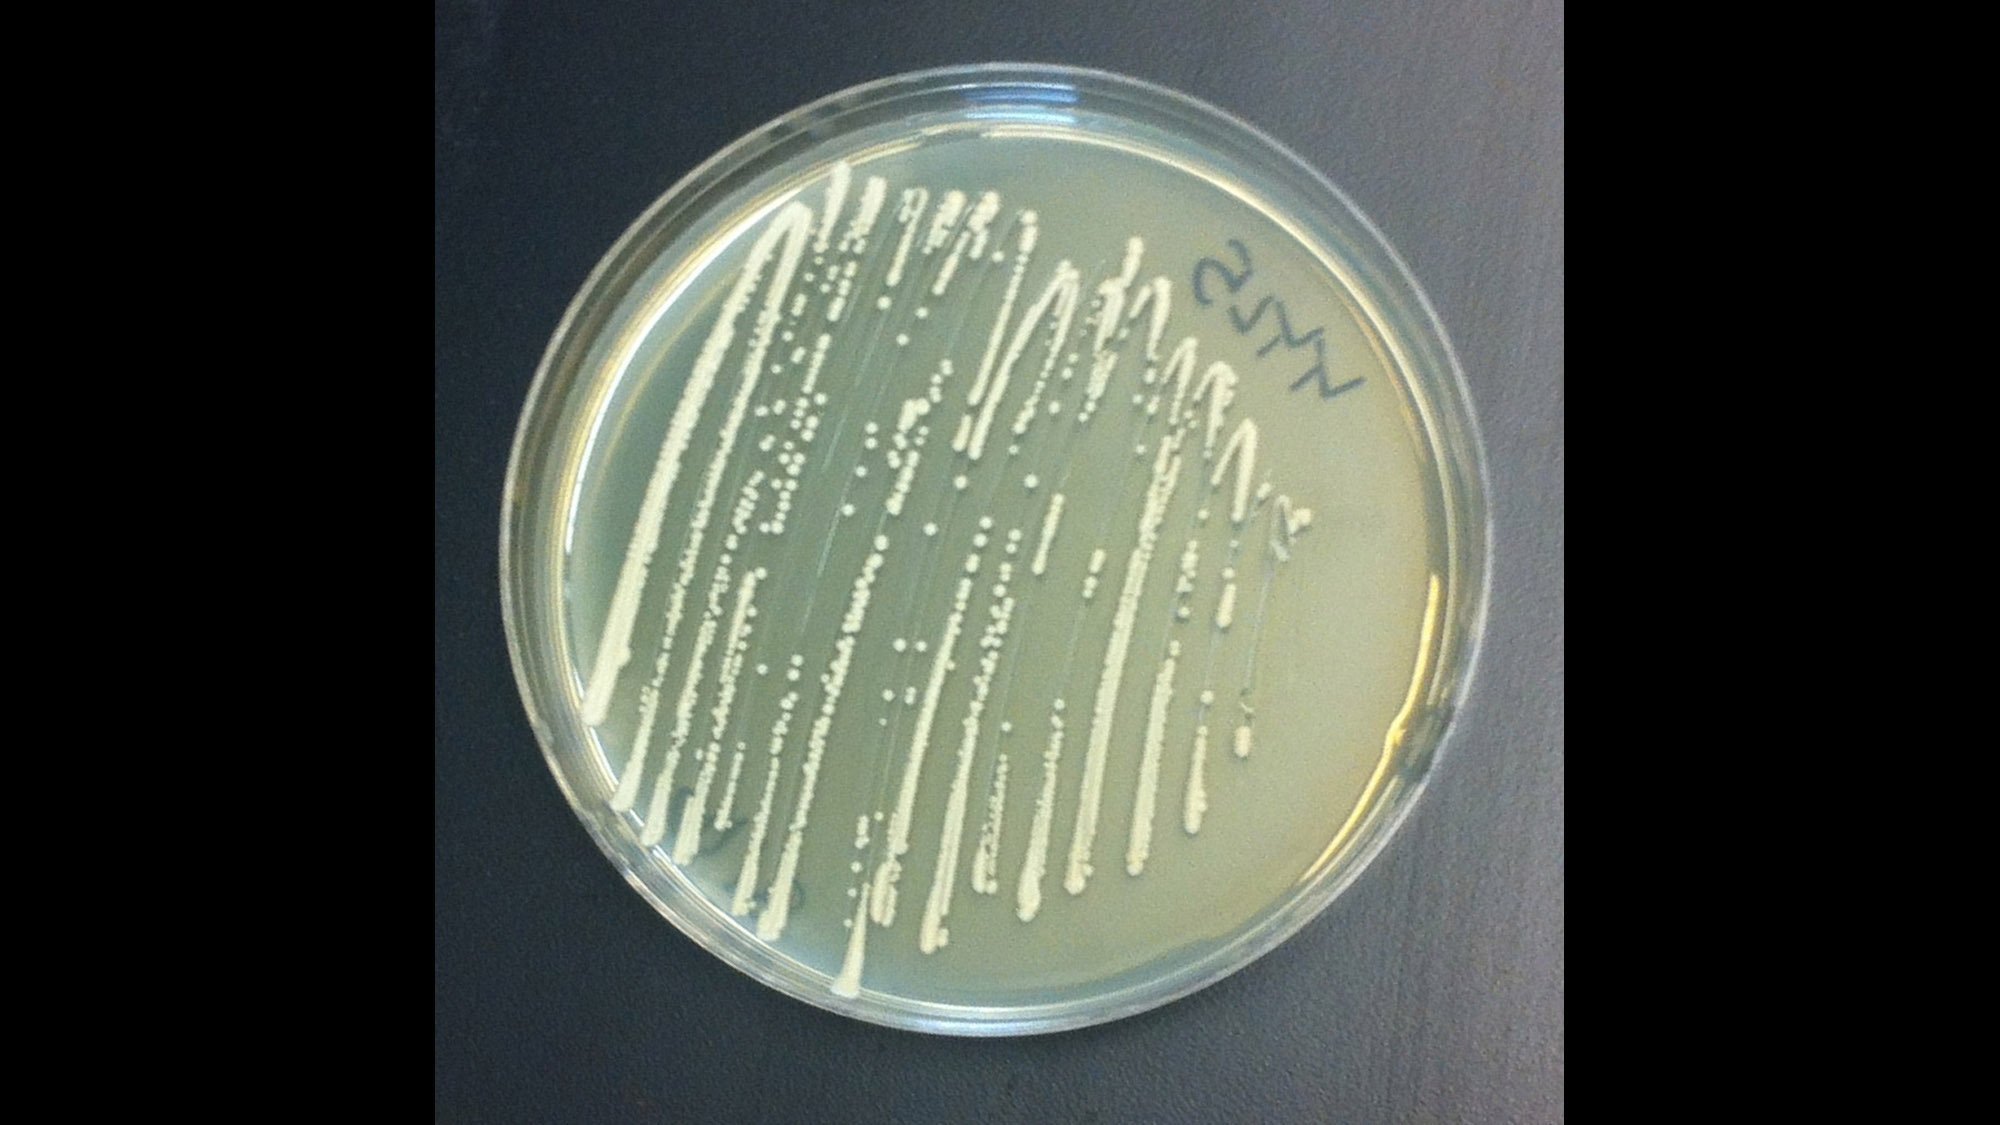 These bioengineered strains of yeast can produce synthetic narcotics.